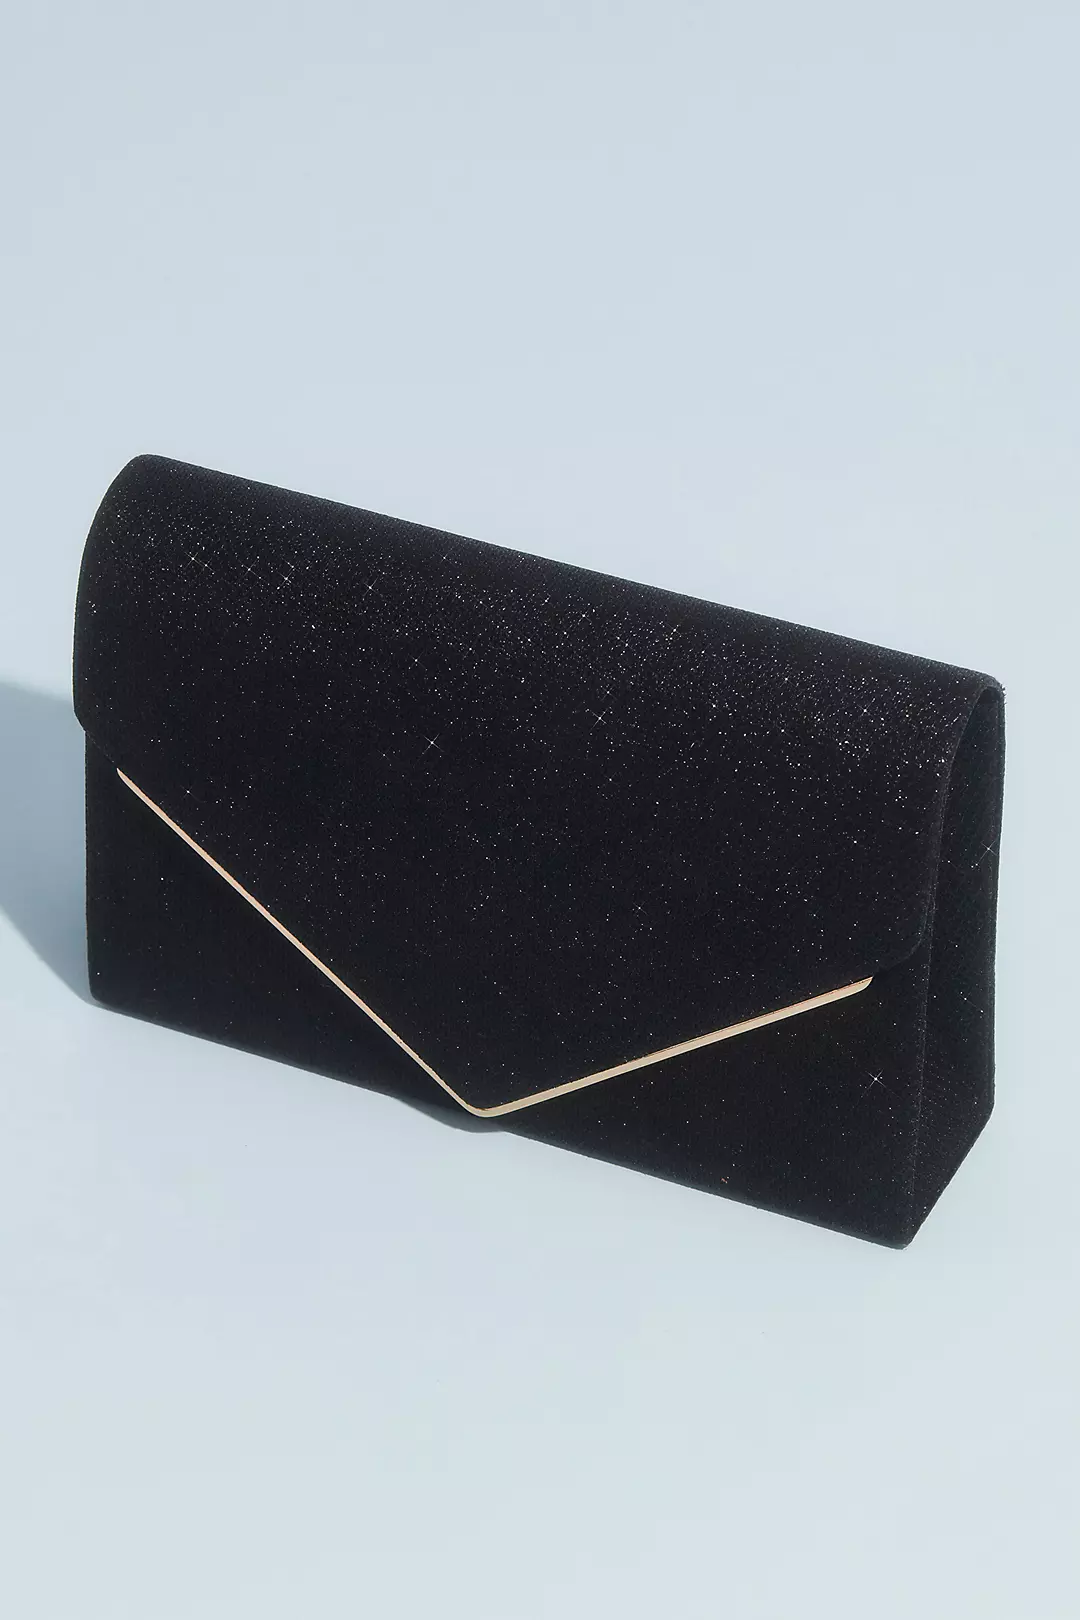 Glitter Knit Envelope Clutch with Metal Edge Image